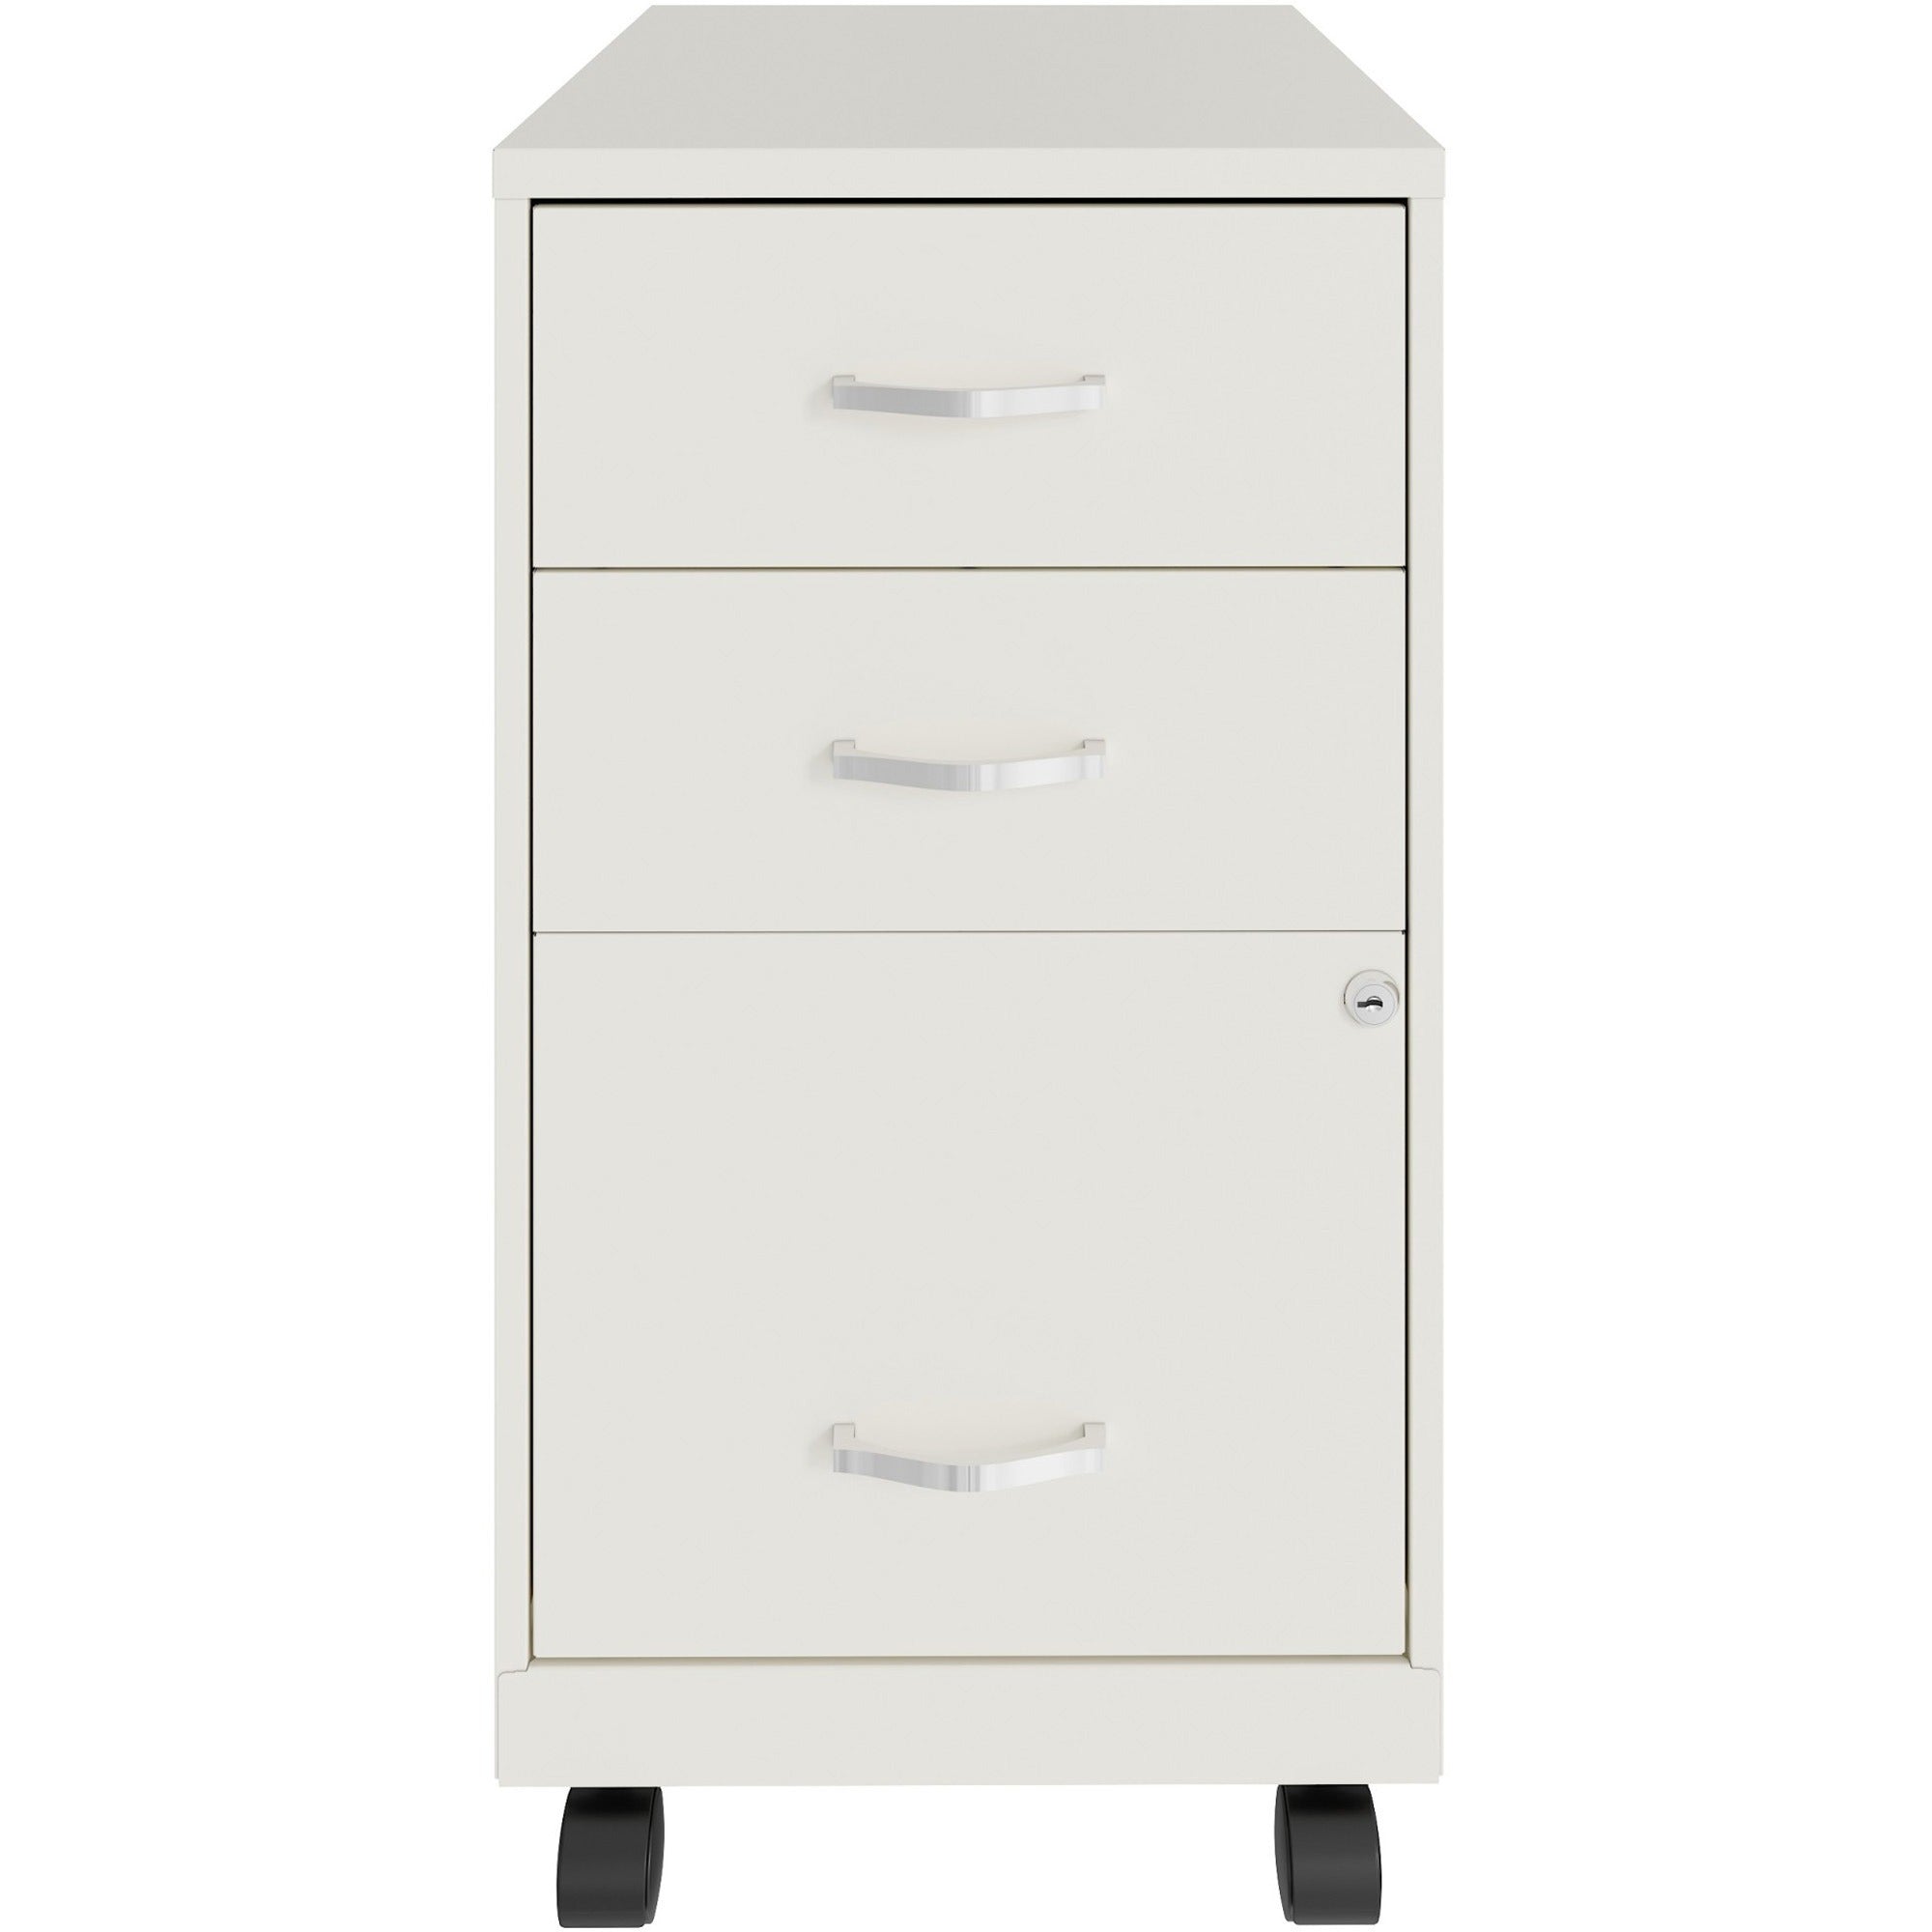 nusparc-3-drawer-organizer-metal-file-cabinet-142-x-18-x-267-3-x-drawers-for-file-box-letter-glide-suspension-3-4-drawer-extension-anti-tip-lockable-mobility-white-metal-recycled_nprvf318cmwe - 2